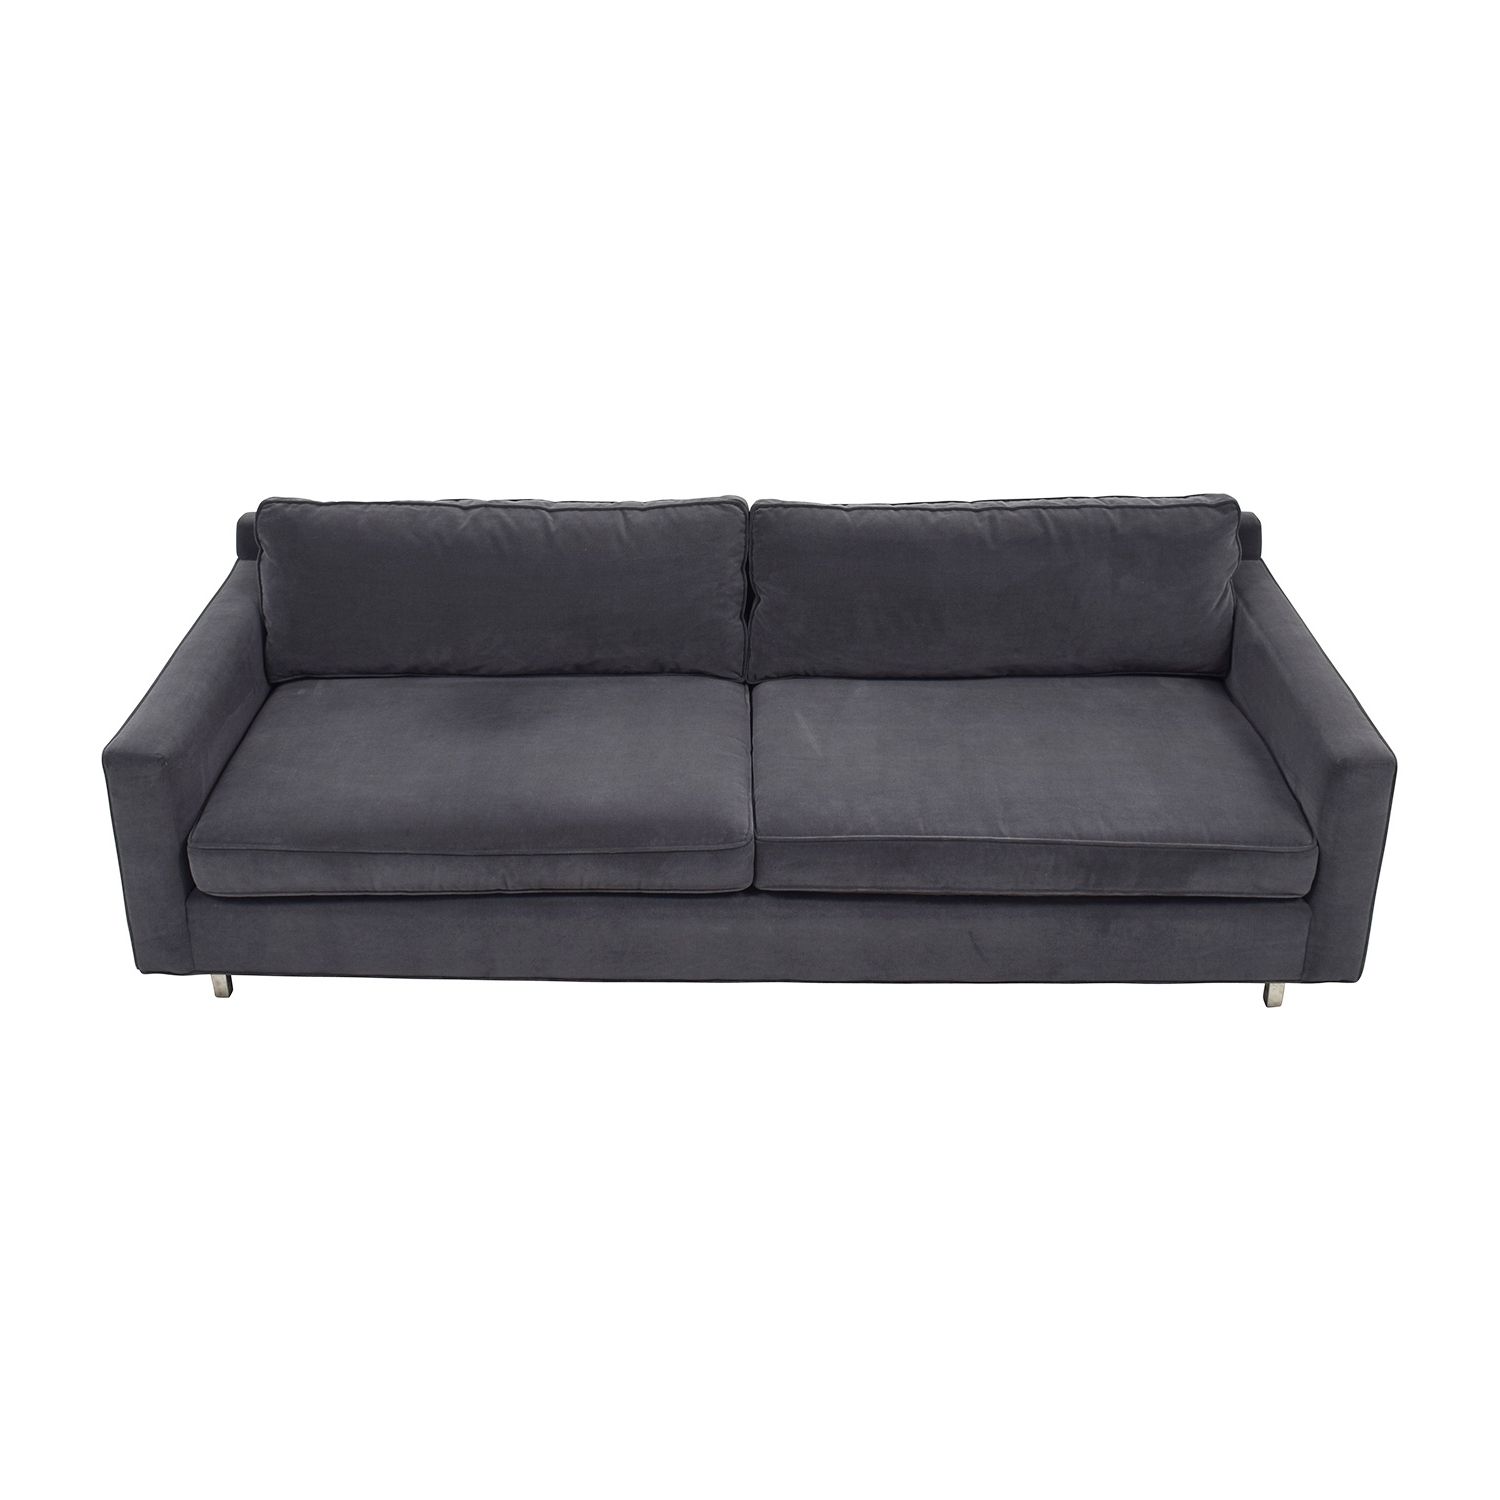 [%75% Off – Mitchell Gold + Bob Williams Mitchell Gold + Bob Inside Latest Mitchell Gold Sofas|mitchell Gold Sofas With Regard To Recent 75% Off – Mitchell Gold + Bob Williams Mitchell Gold + Bob|2019 Mitchell Gold Sofas Intended For 75% Off – Mitchell Gold + Bob Williams Mitchell Gold + Bob|2019 75% Off – Mitchell Gold + Bob Williams Mitchell Gold + Bob Throughout Mitchell Gold Sofas%] (View 11 of 20)